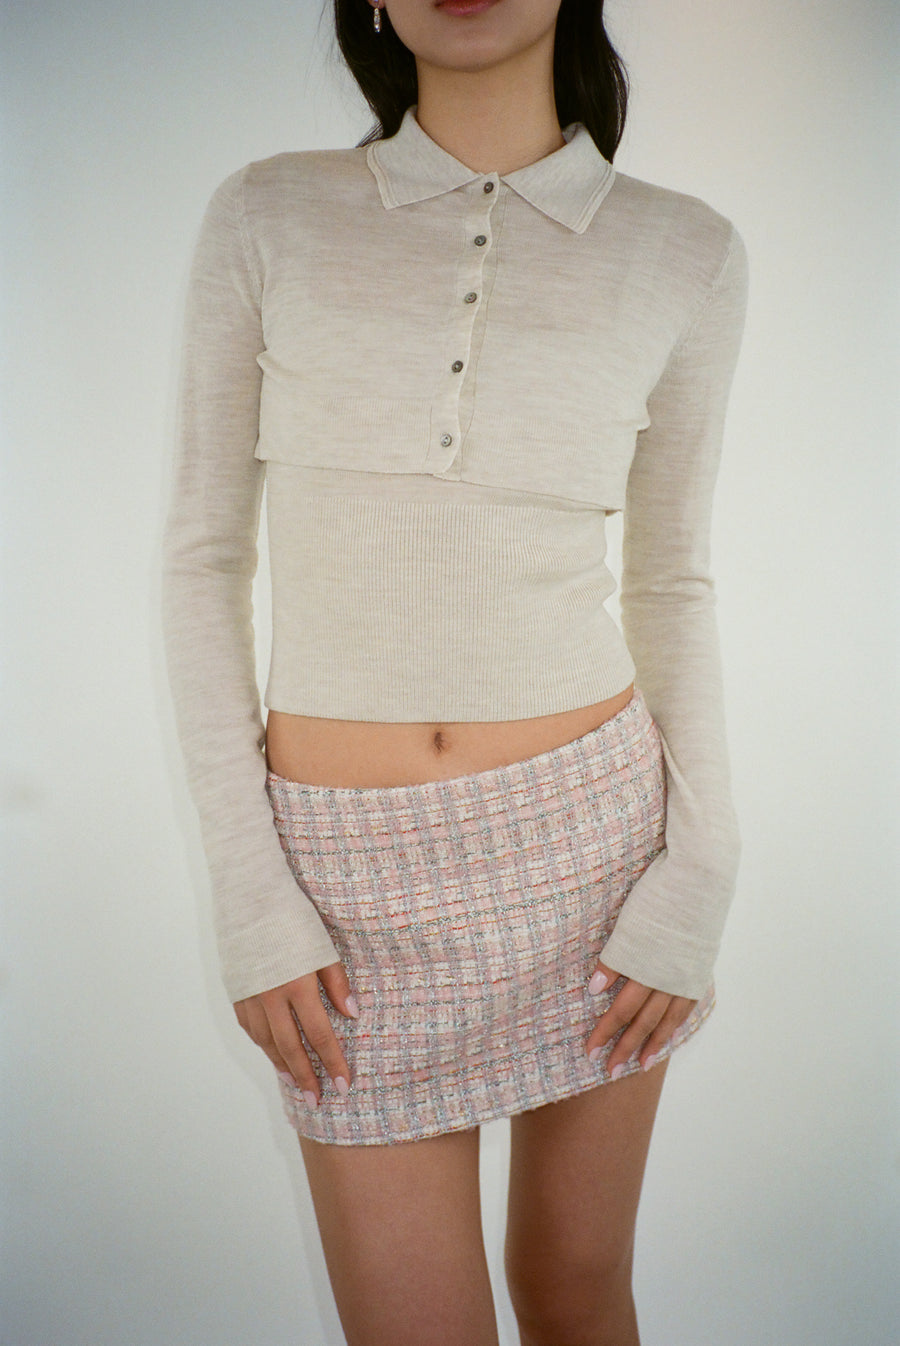 Cropped long sleeve cardigan in off white on model